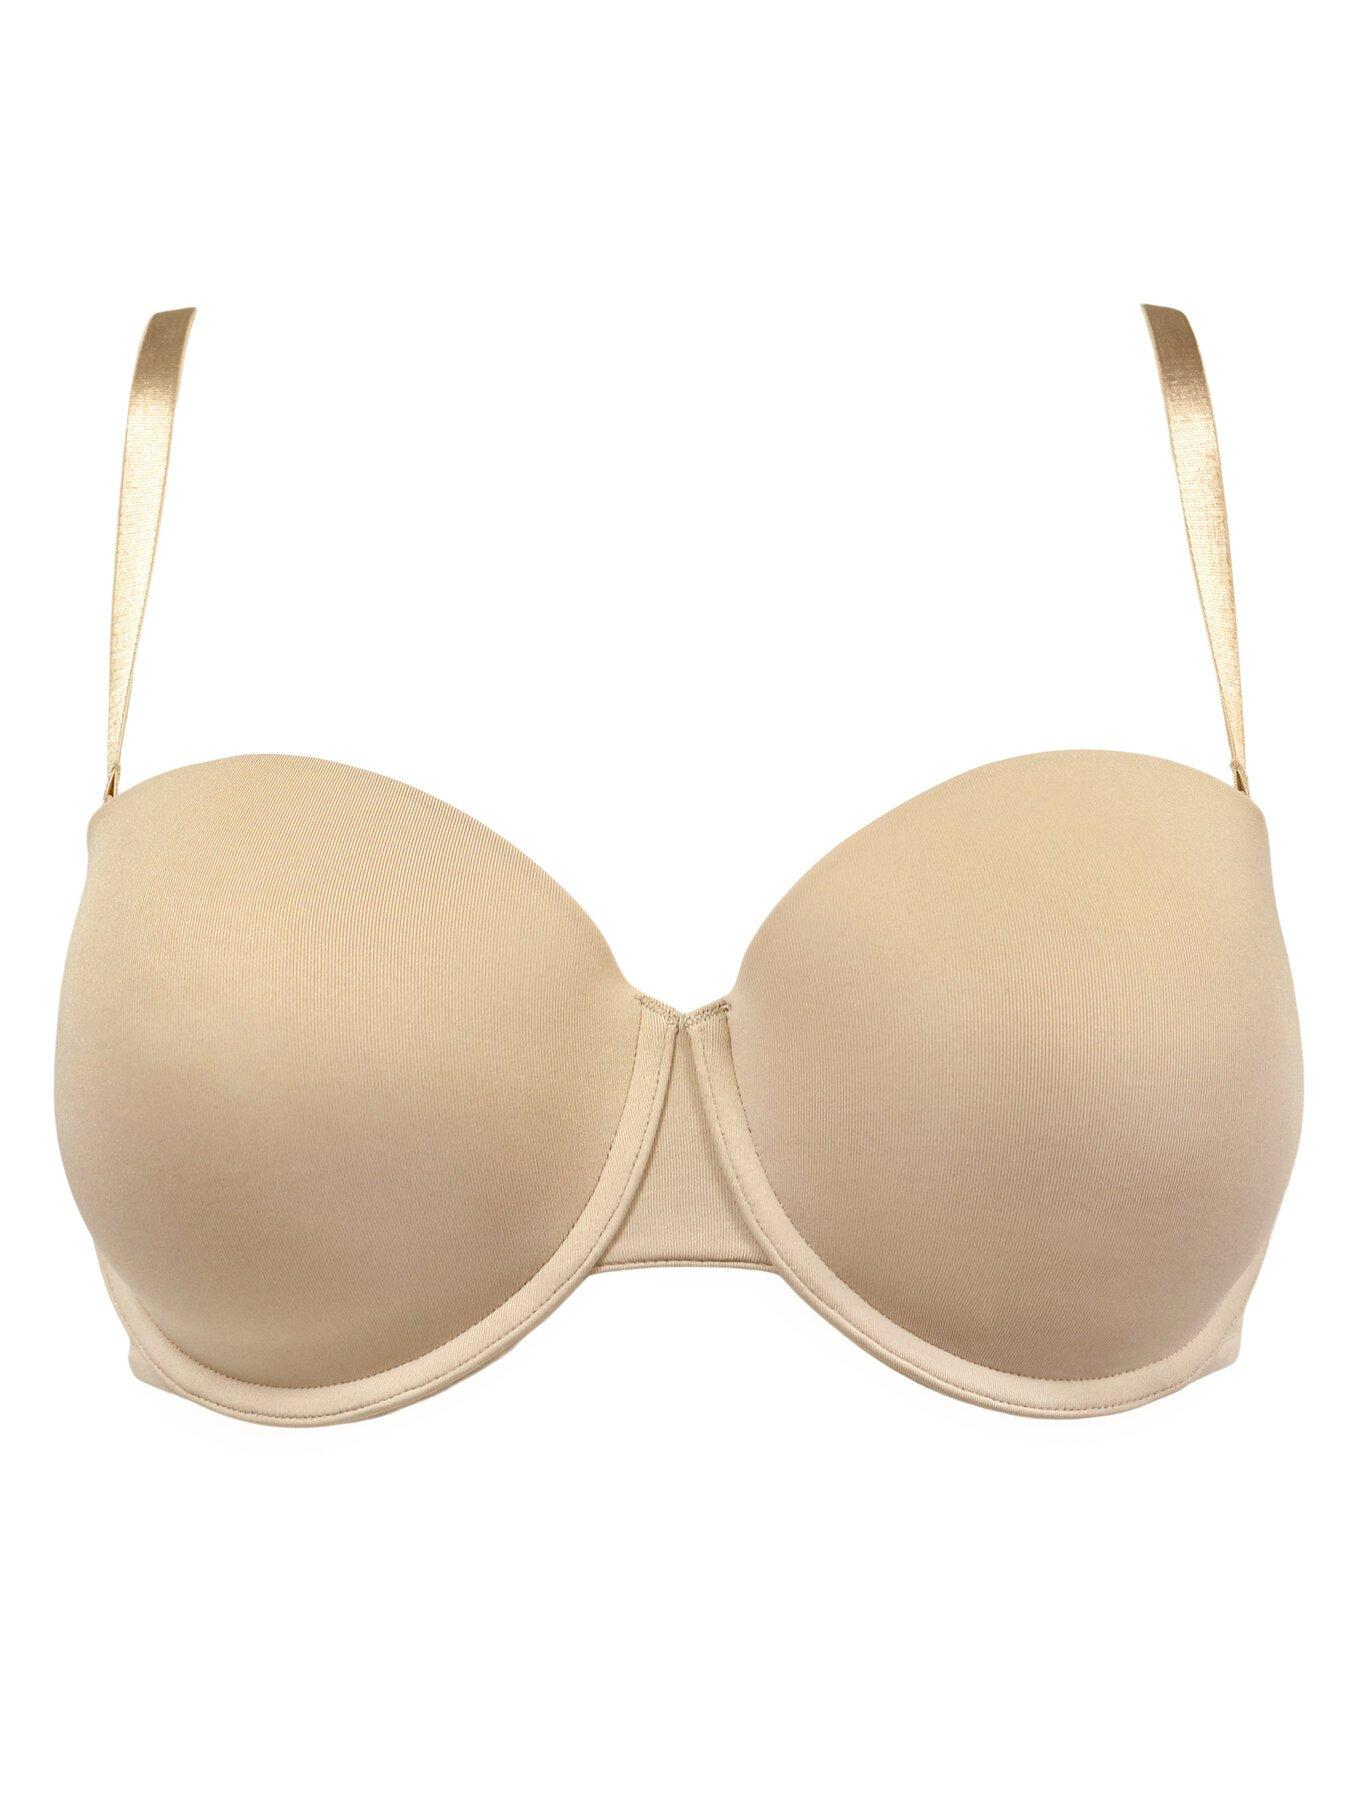 36C formed cup underwire push up bra, Women's Fashion, Maternity wear on  Carousell